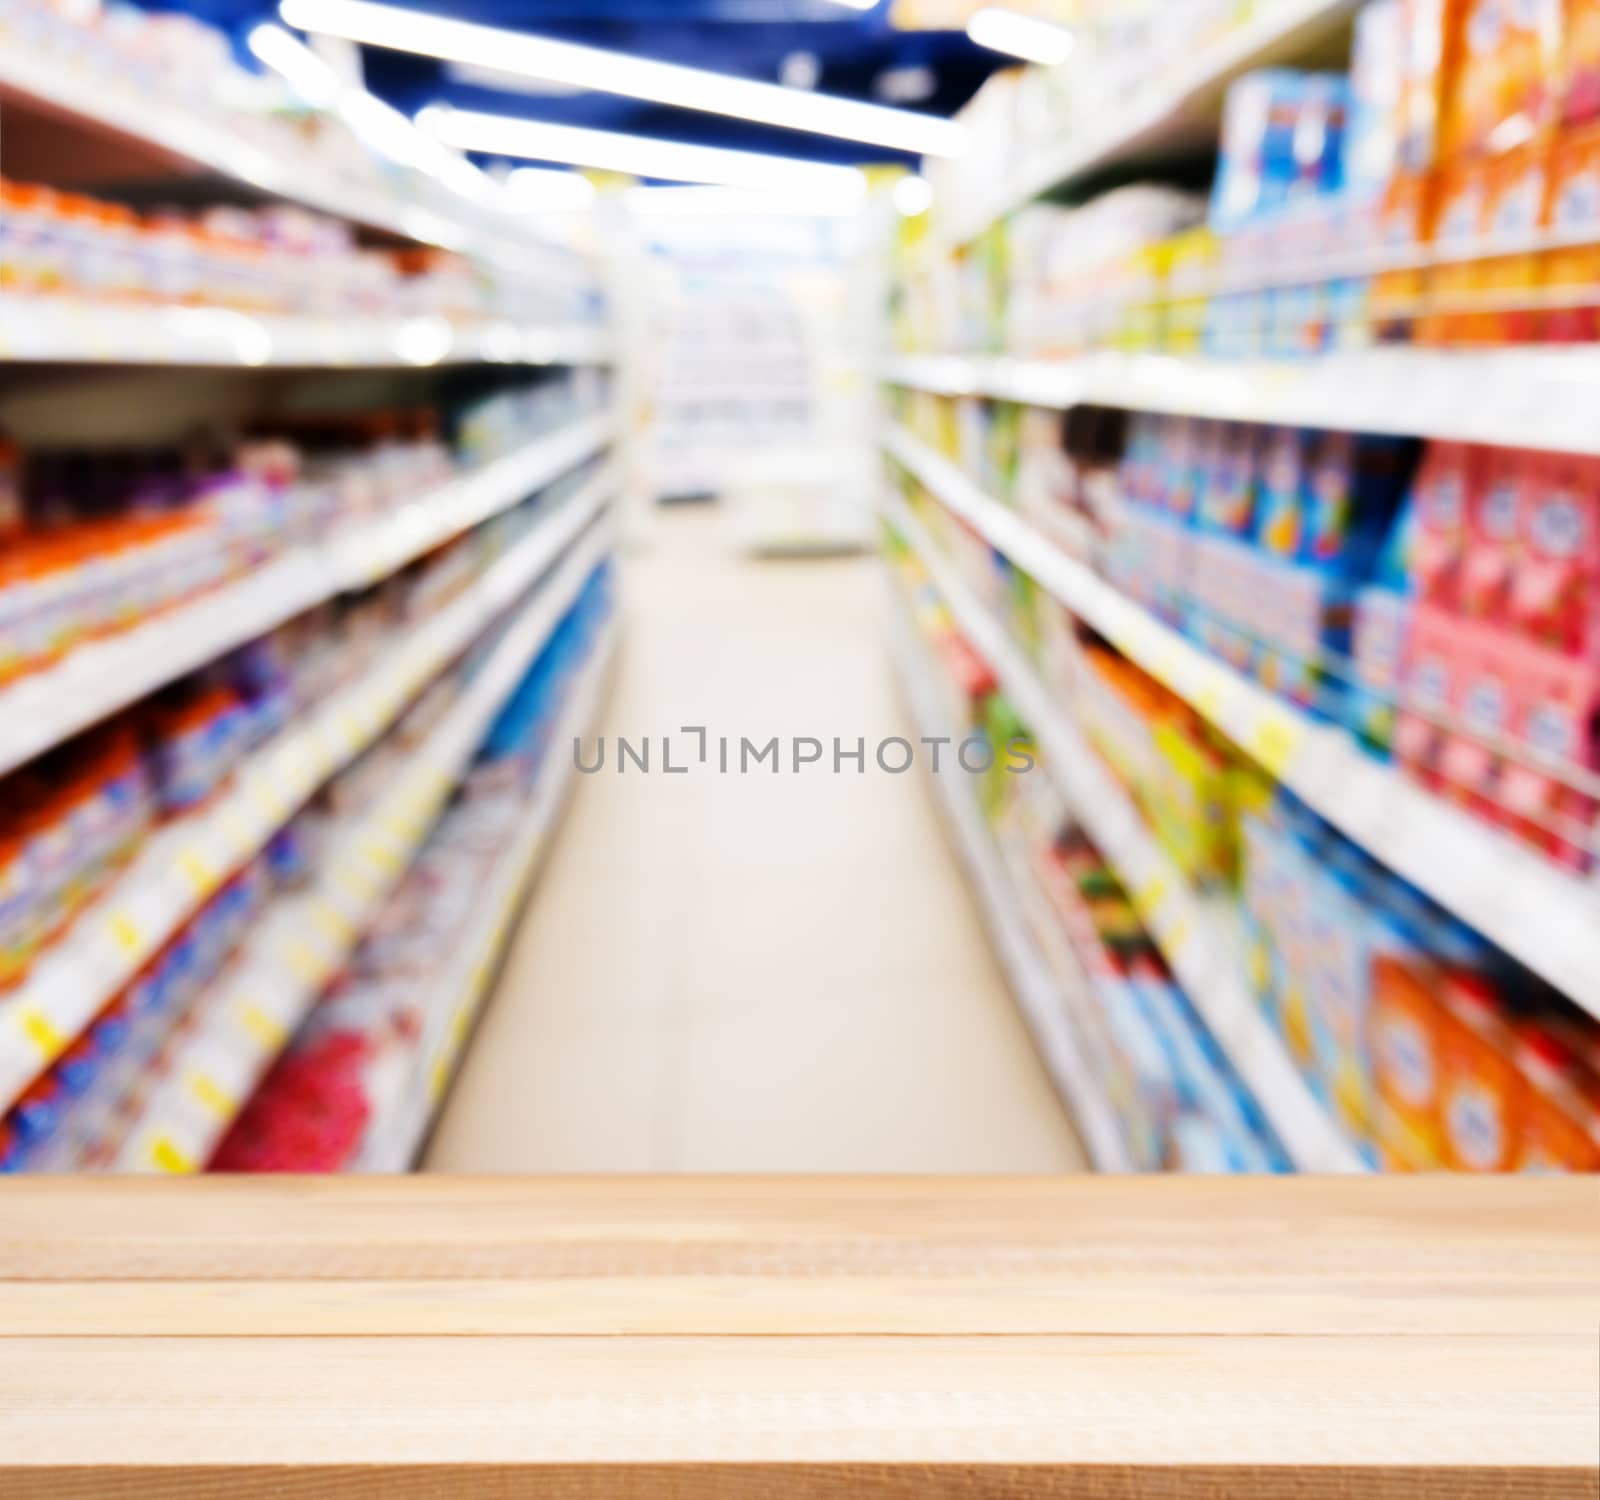 Wooden board empty table in front of blurred background. Perspective light wood table over blur of baby foods jars in store. Mock up for display or montage your product.